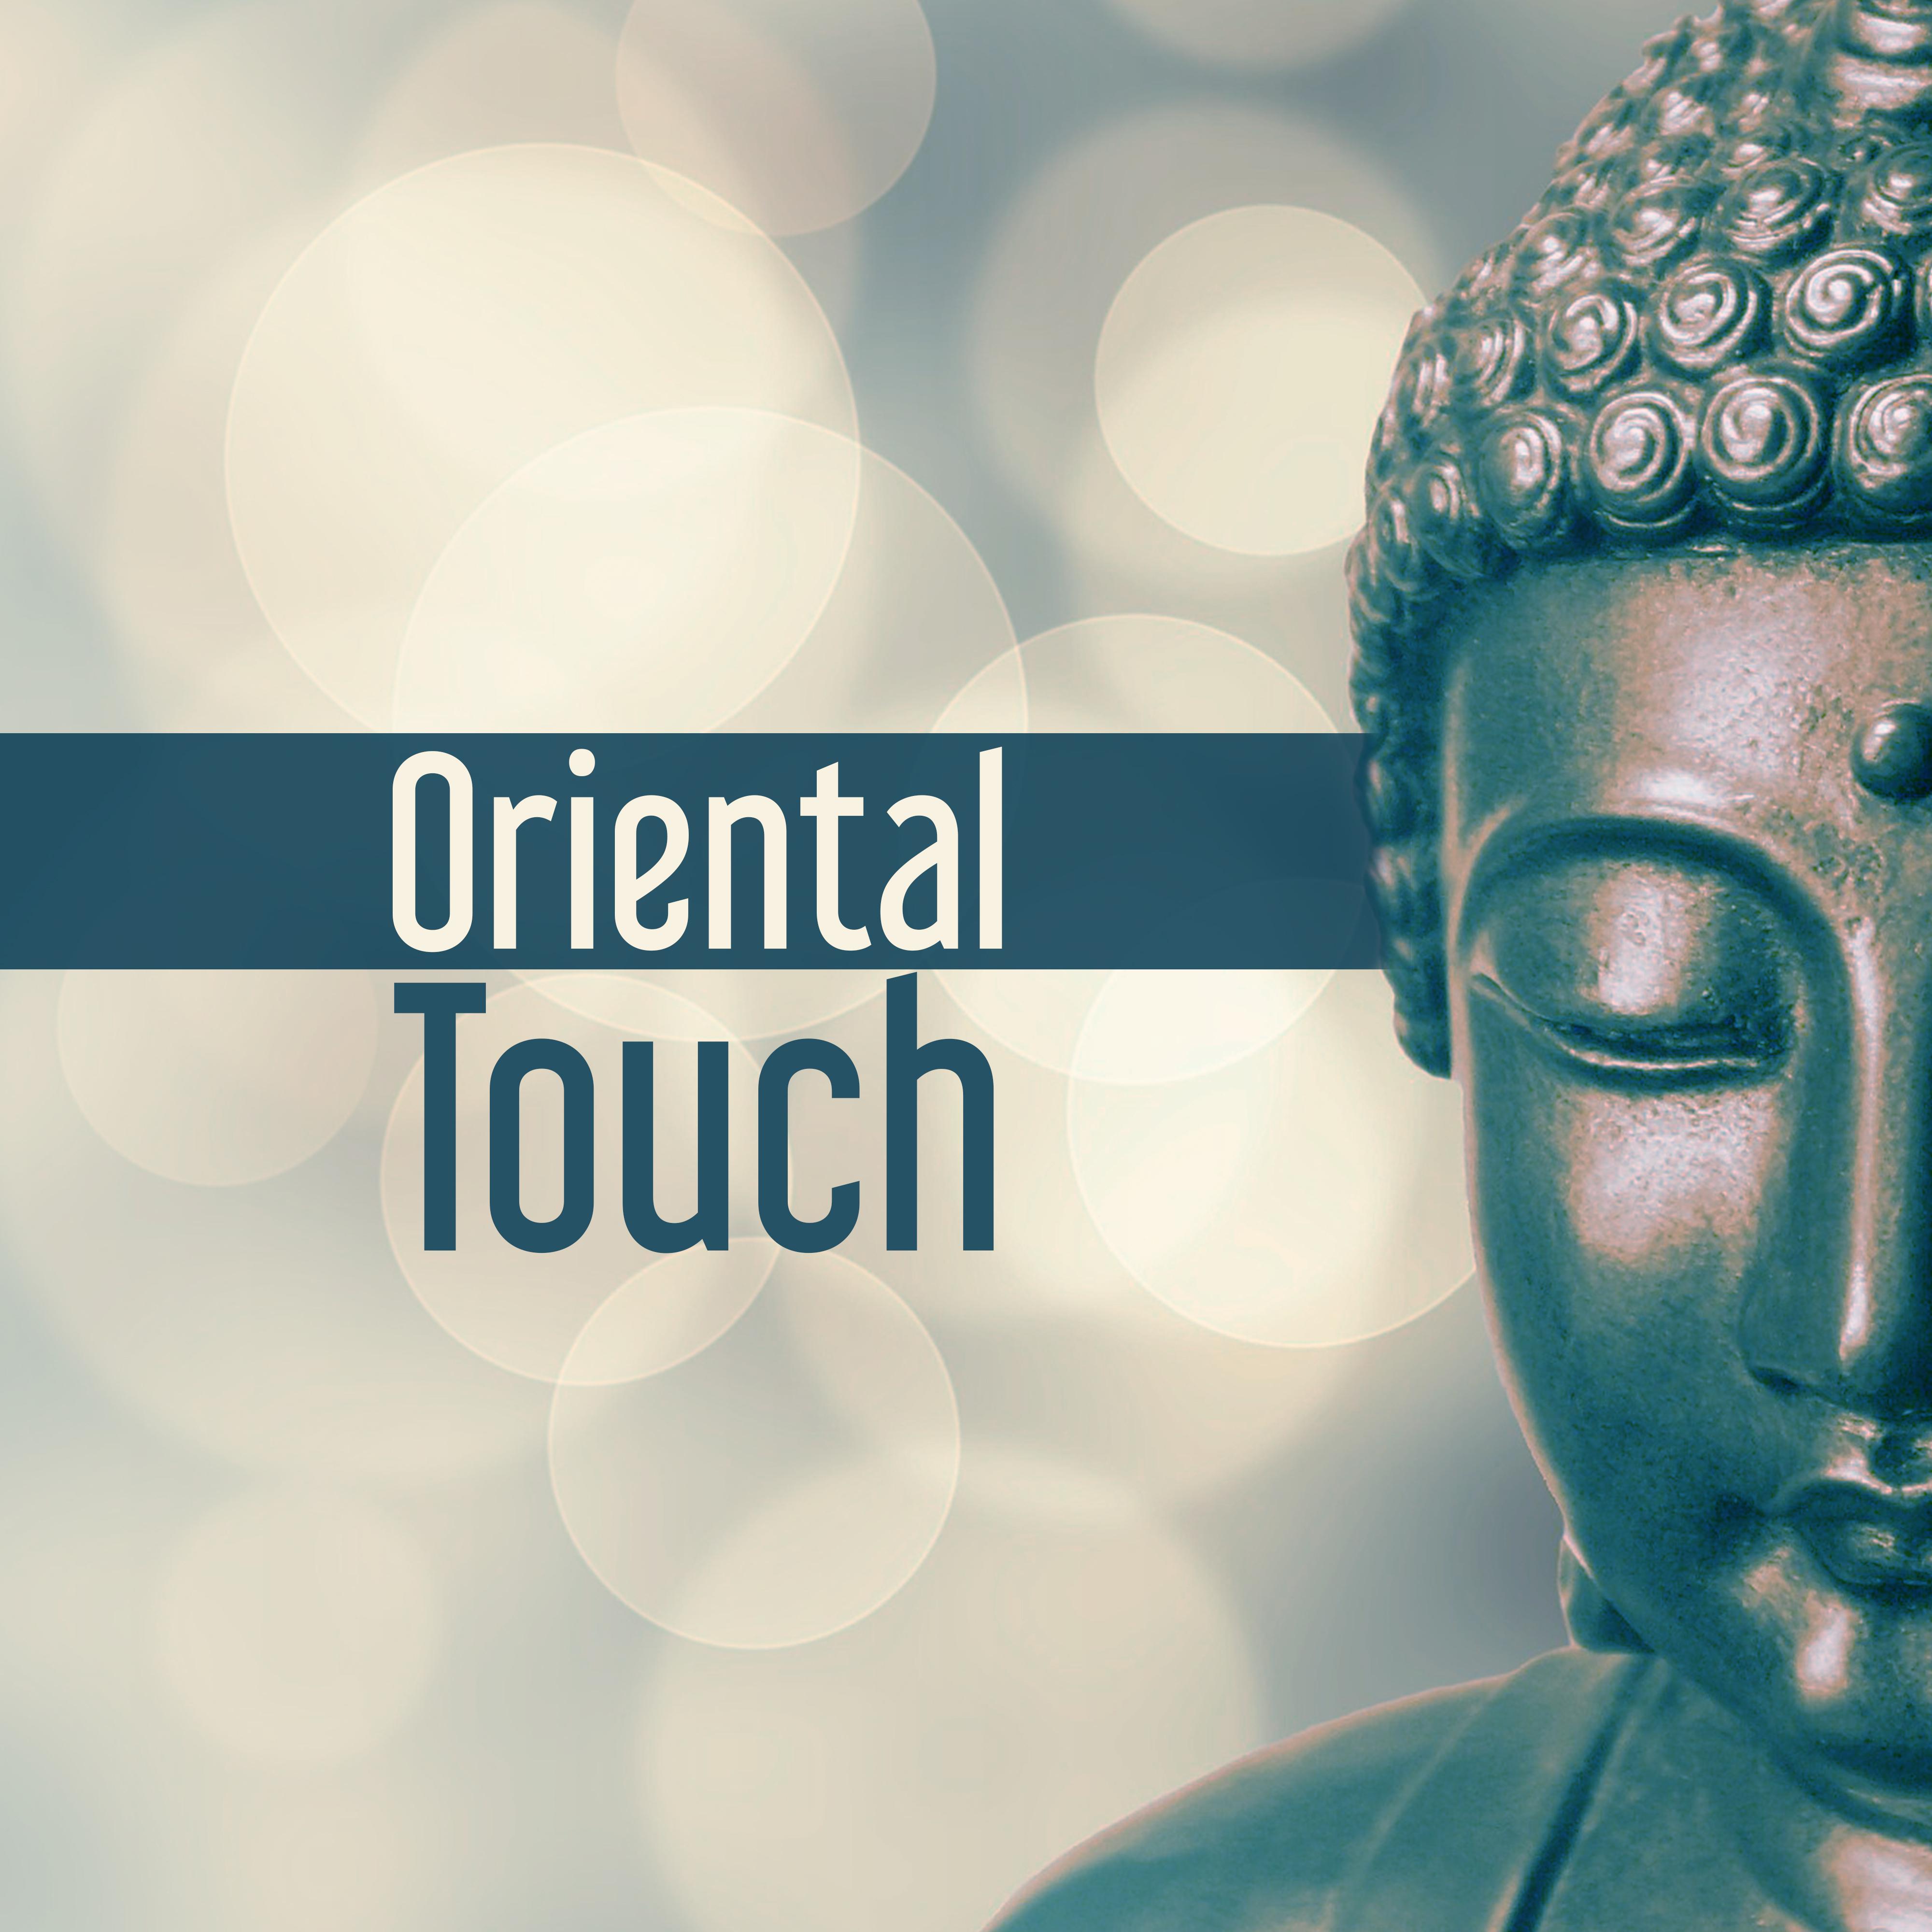 Oriental Touch – Sounds for Meditation, Reiki Music, Deep Focus, Yoga Training, Peaceful Songs, Yoga Poses